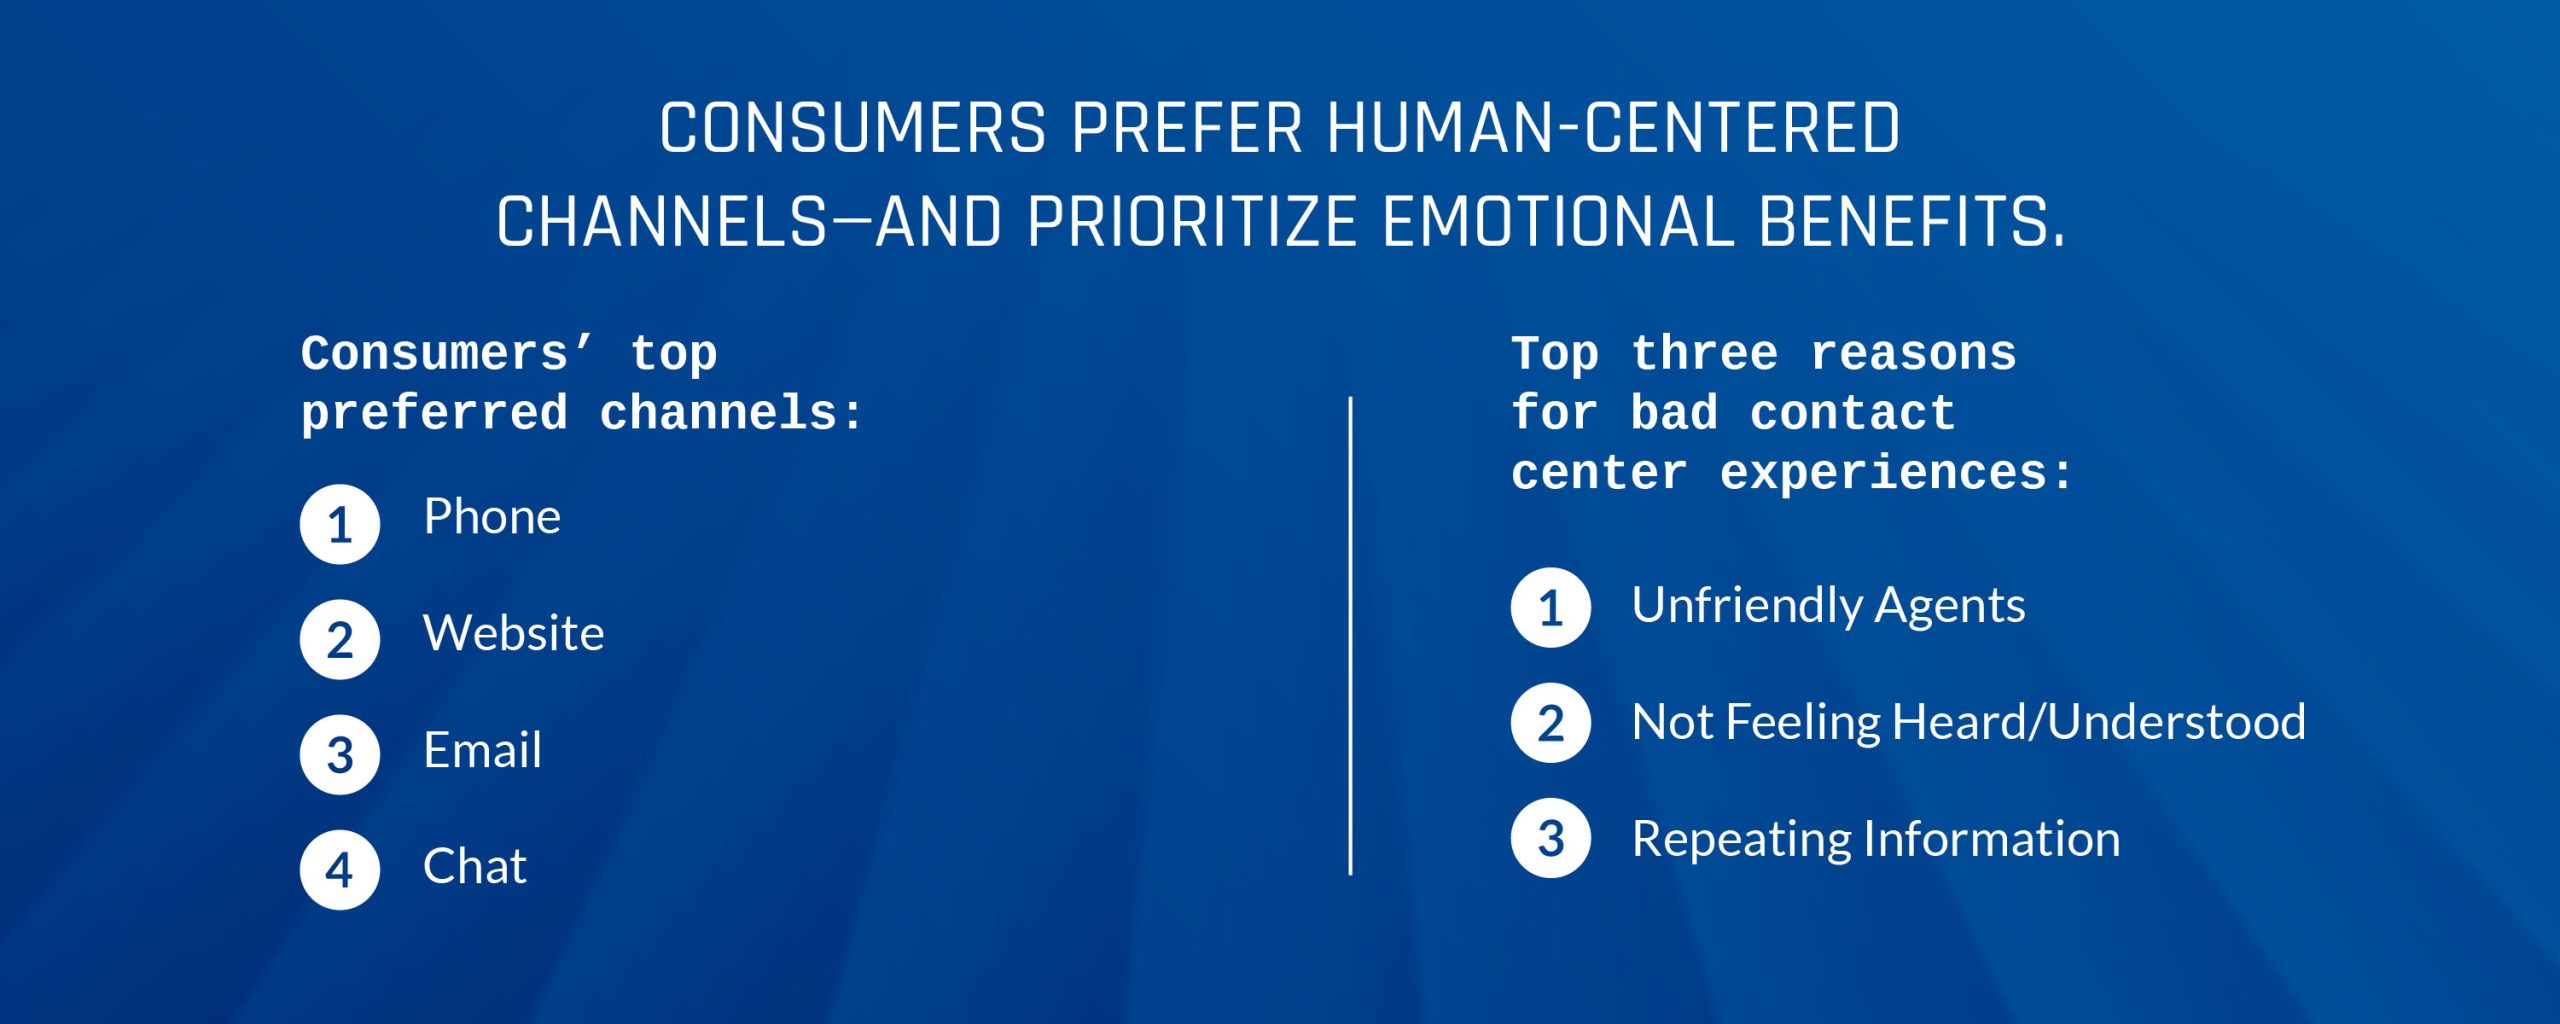 Consumer prefer human-centered channels